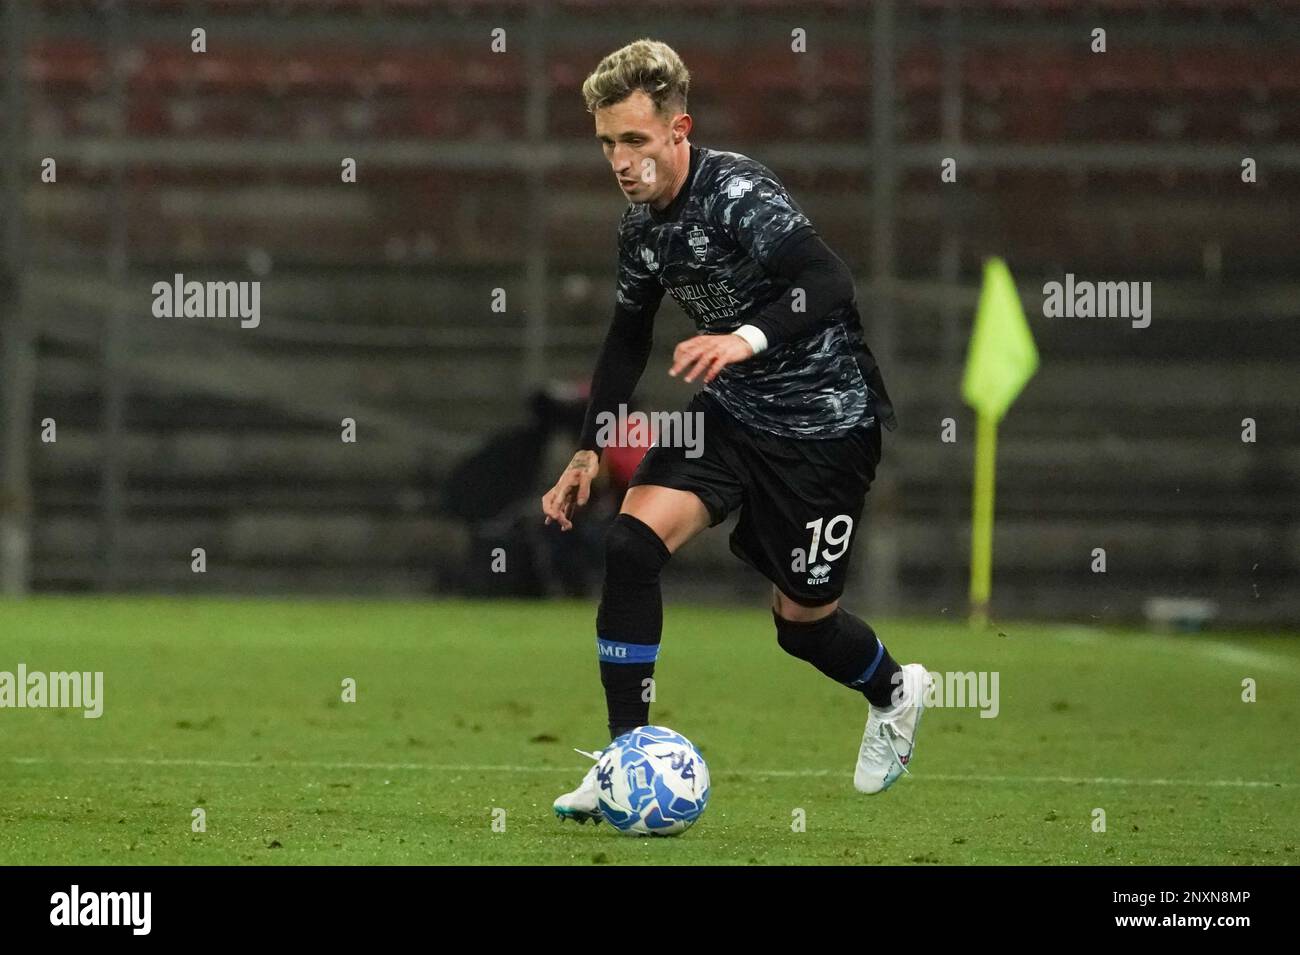 Perugia, Italy. 01st Mar, 2023. blanco alex (n.19 como 1907) during AC Perugia vs Como 1907, Italian soccer Serie B match in Perugia, Italy, March 01 2023 Credit: Independent Photo Agency/Alamy Live News Stock Photo